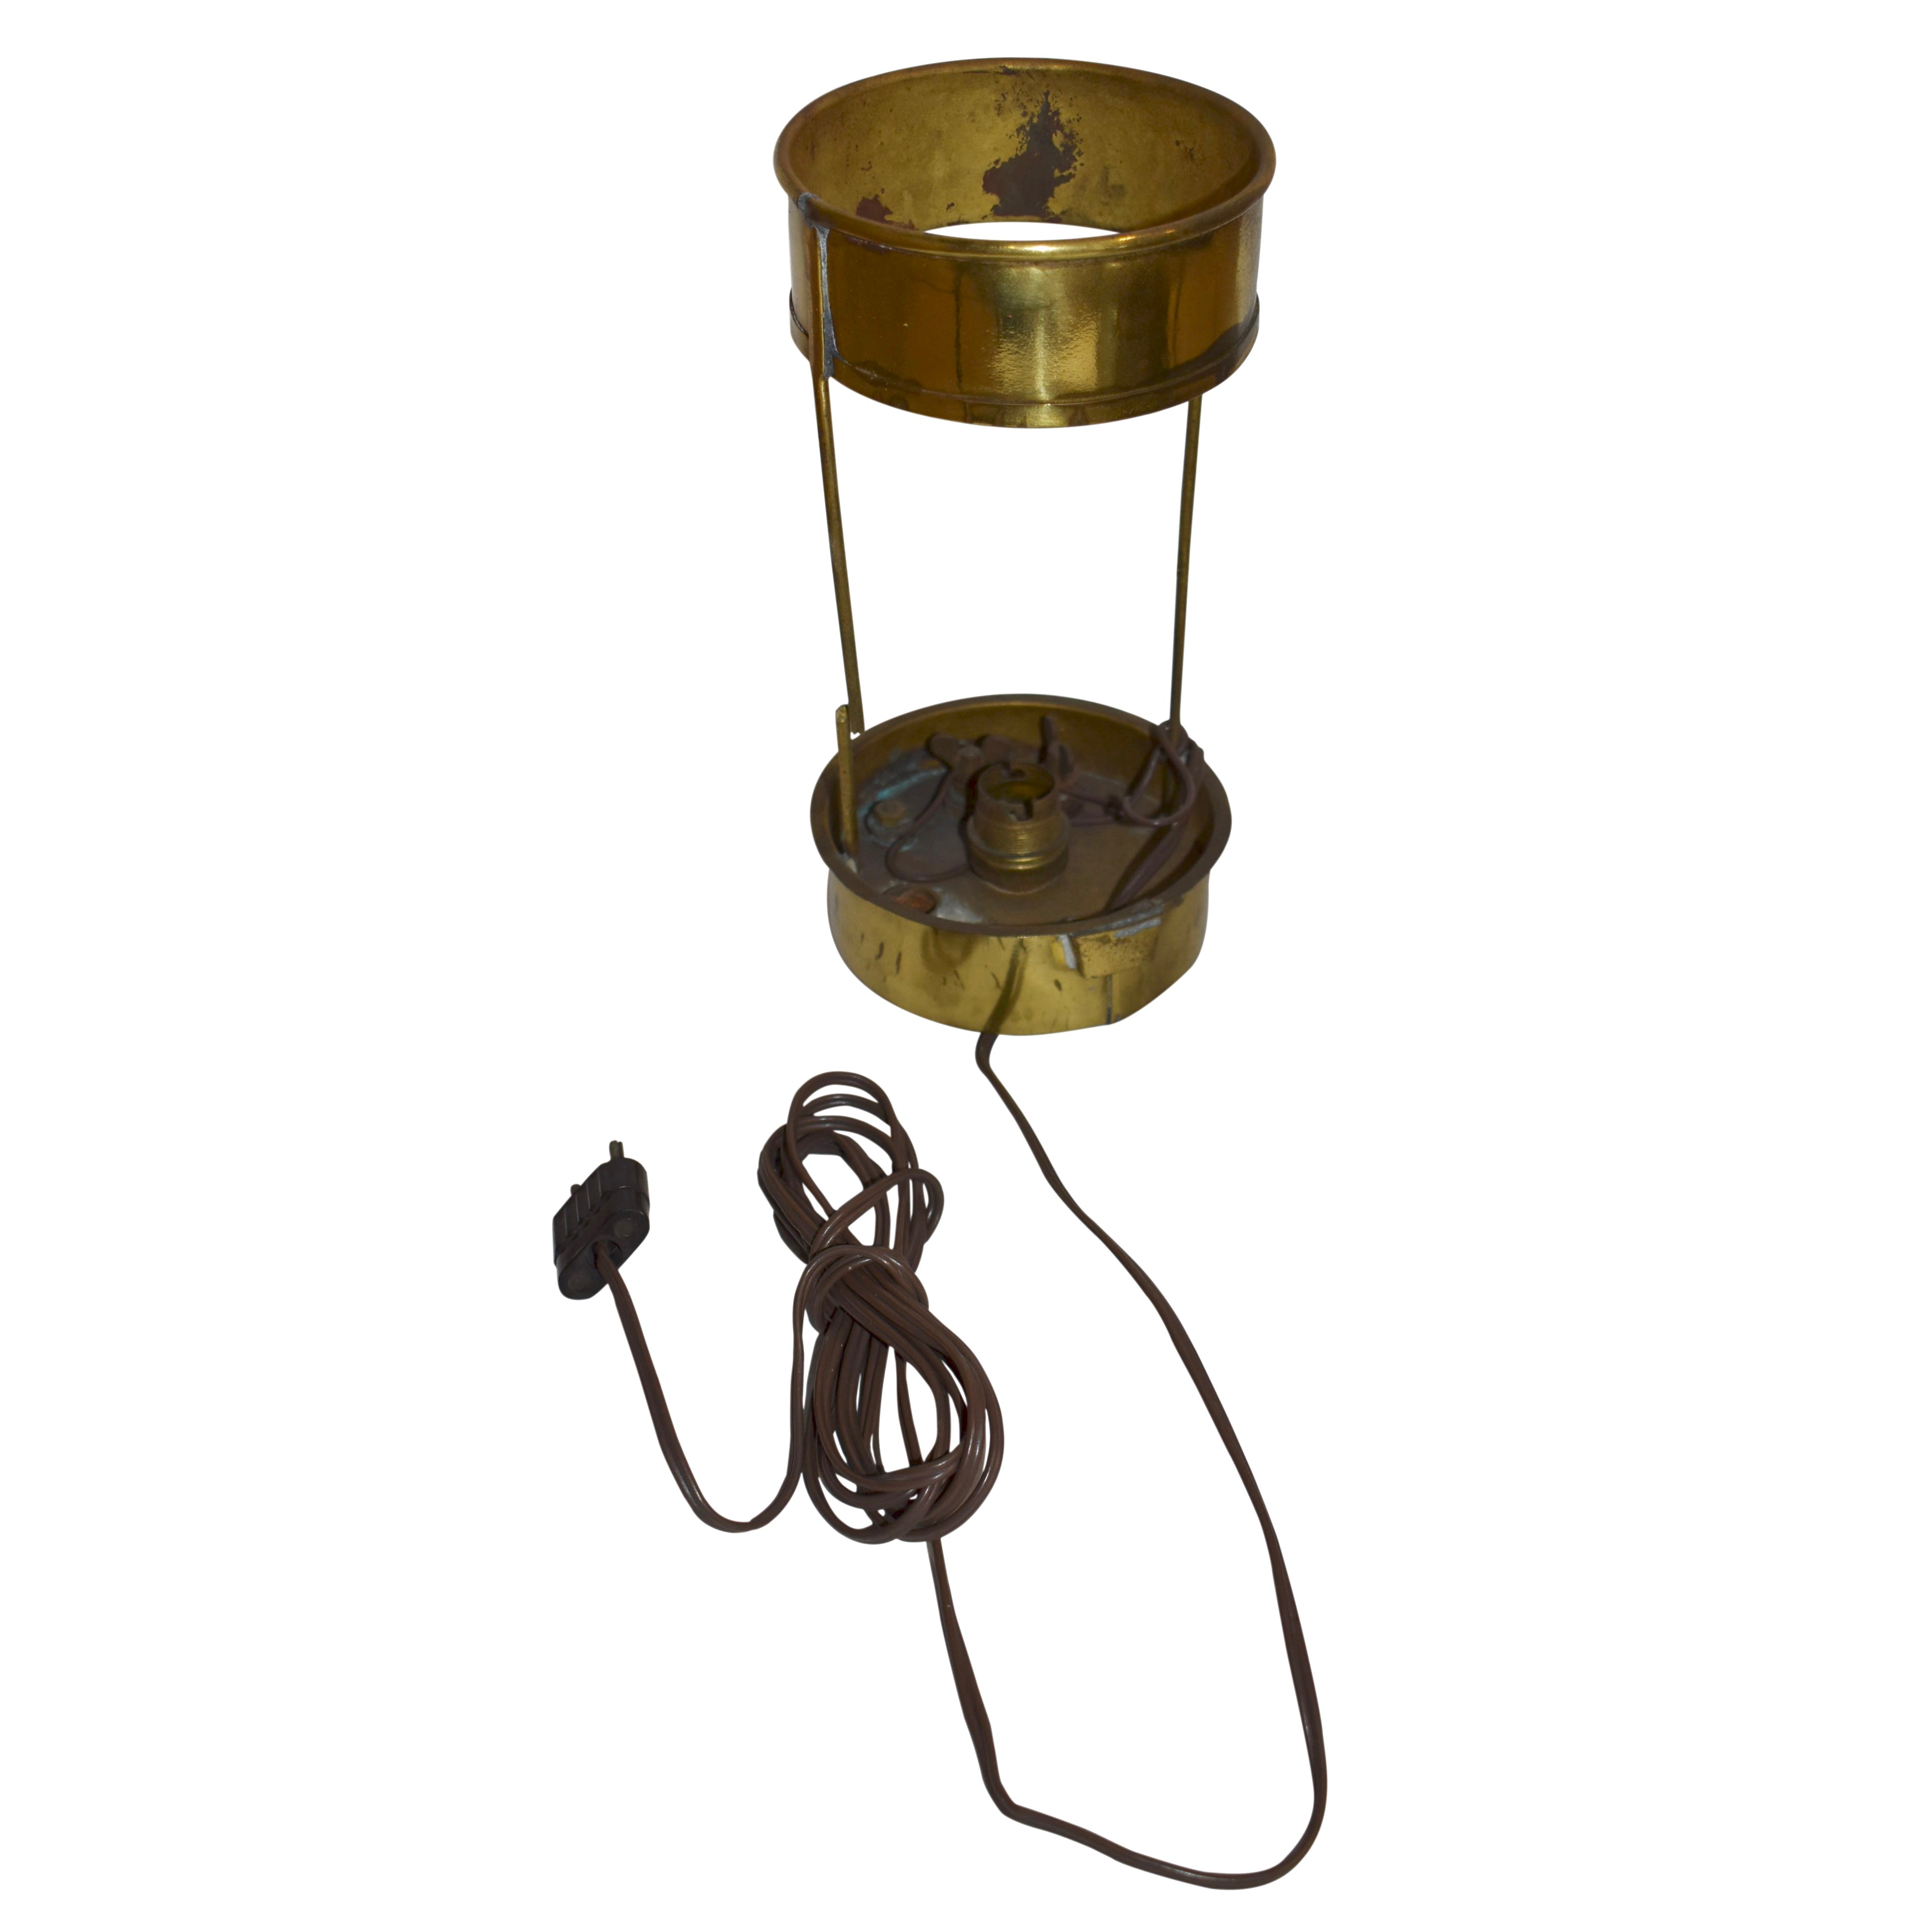 German Copper and Brass Navigation Lamp